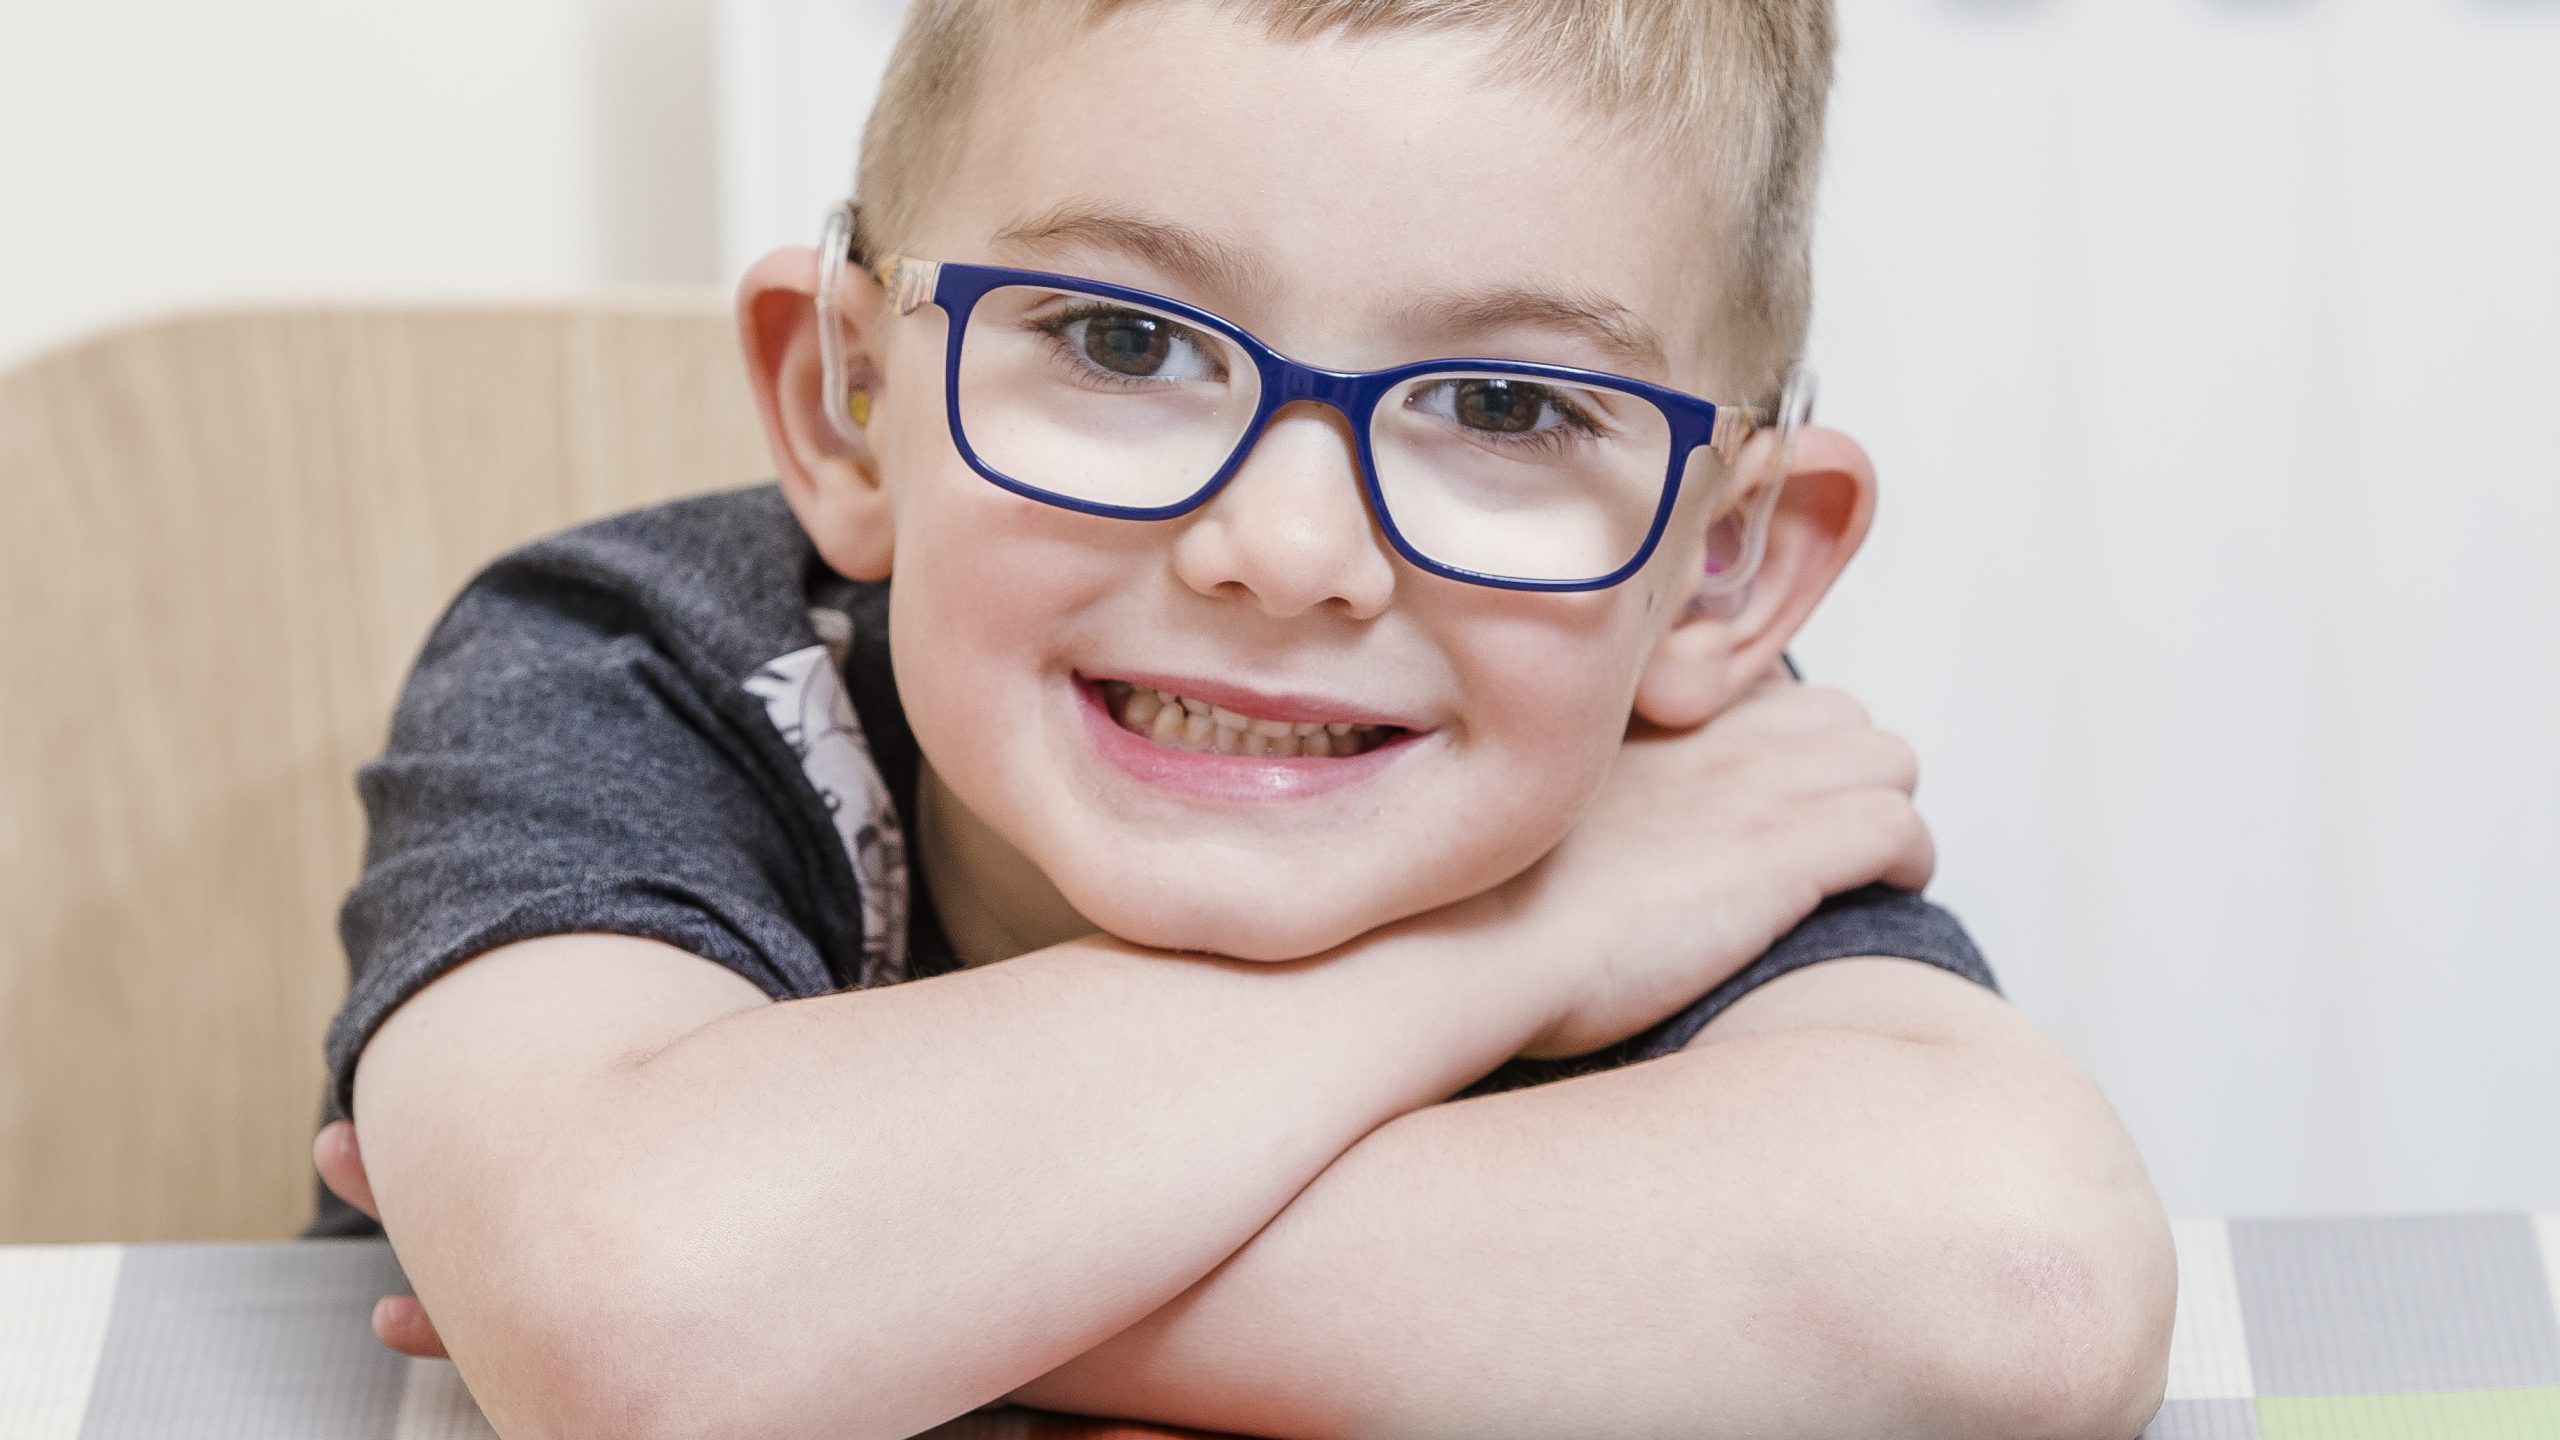 A young boy wearing glasses with his arms folded on a table